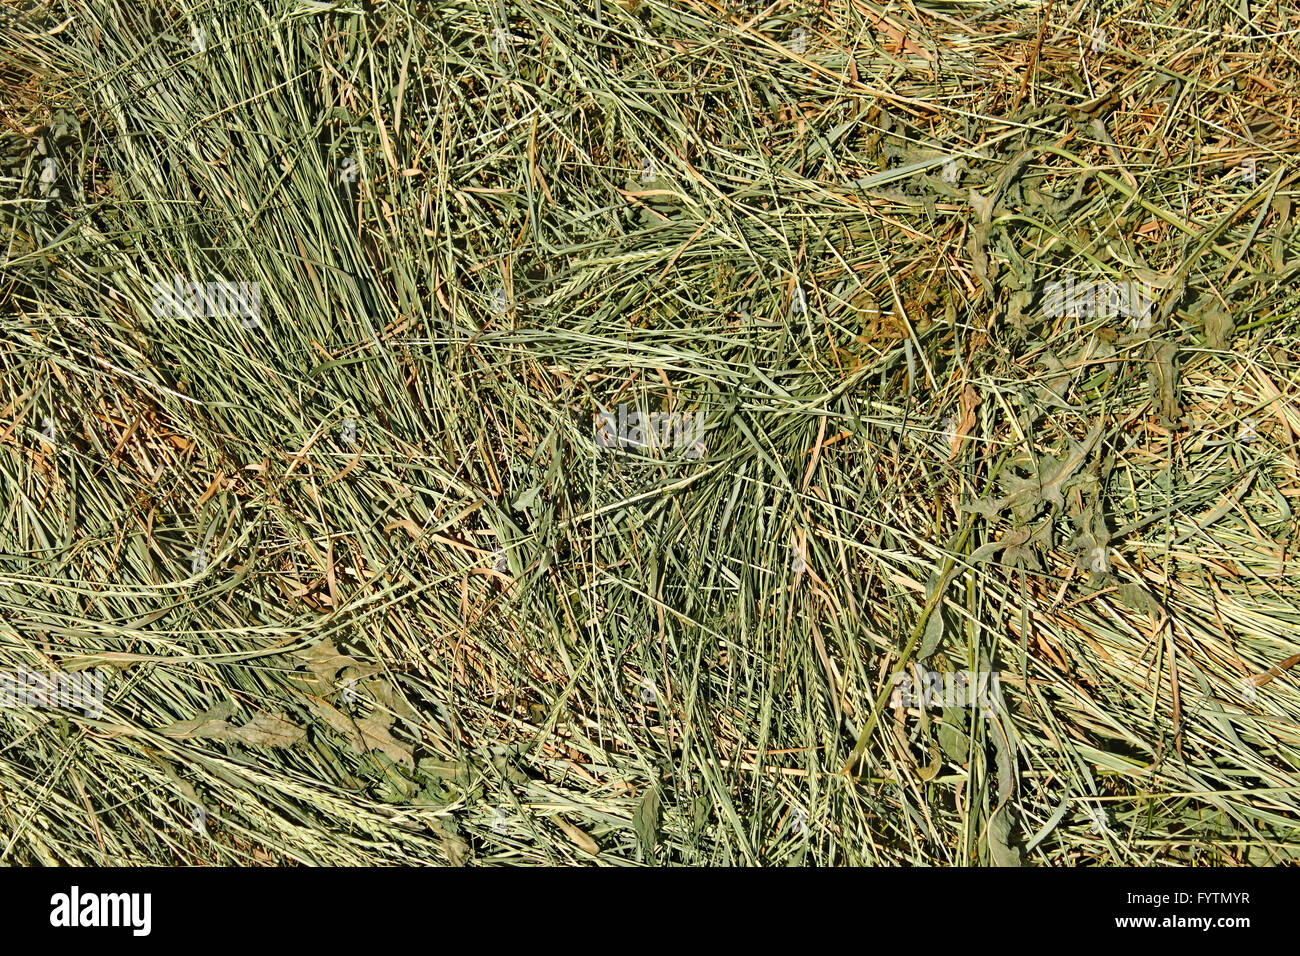 Hay with cereal and other wild grasses Stock Photo